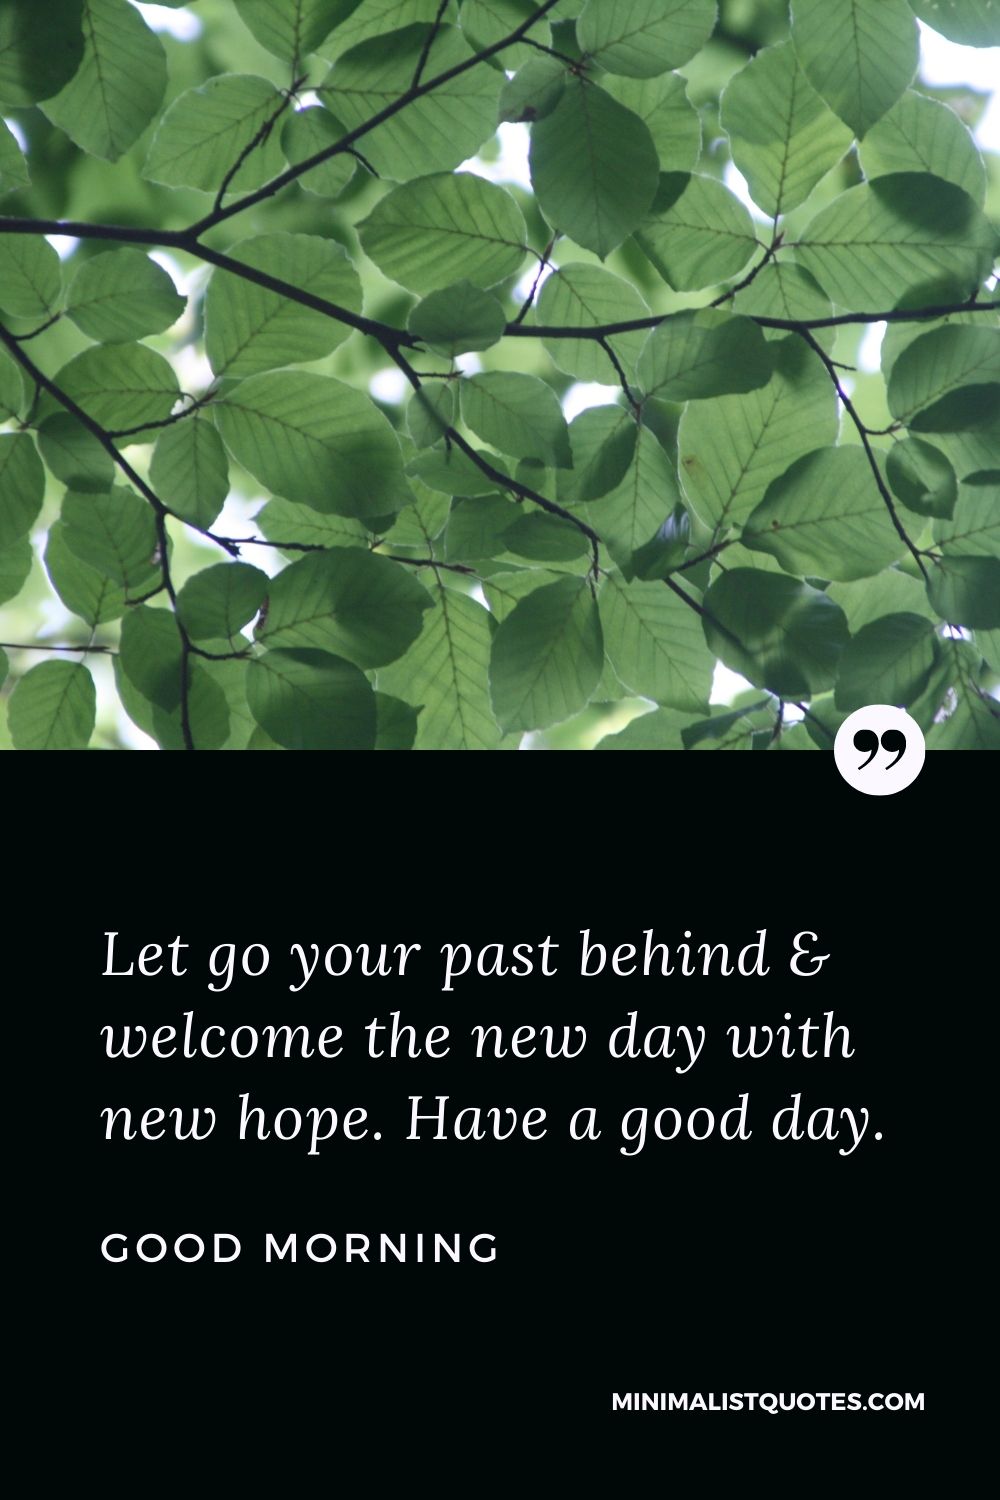 Good Morning Wish & Message With Image: Let go your past behind & welcome the new day with new hope. Have a good day.